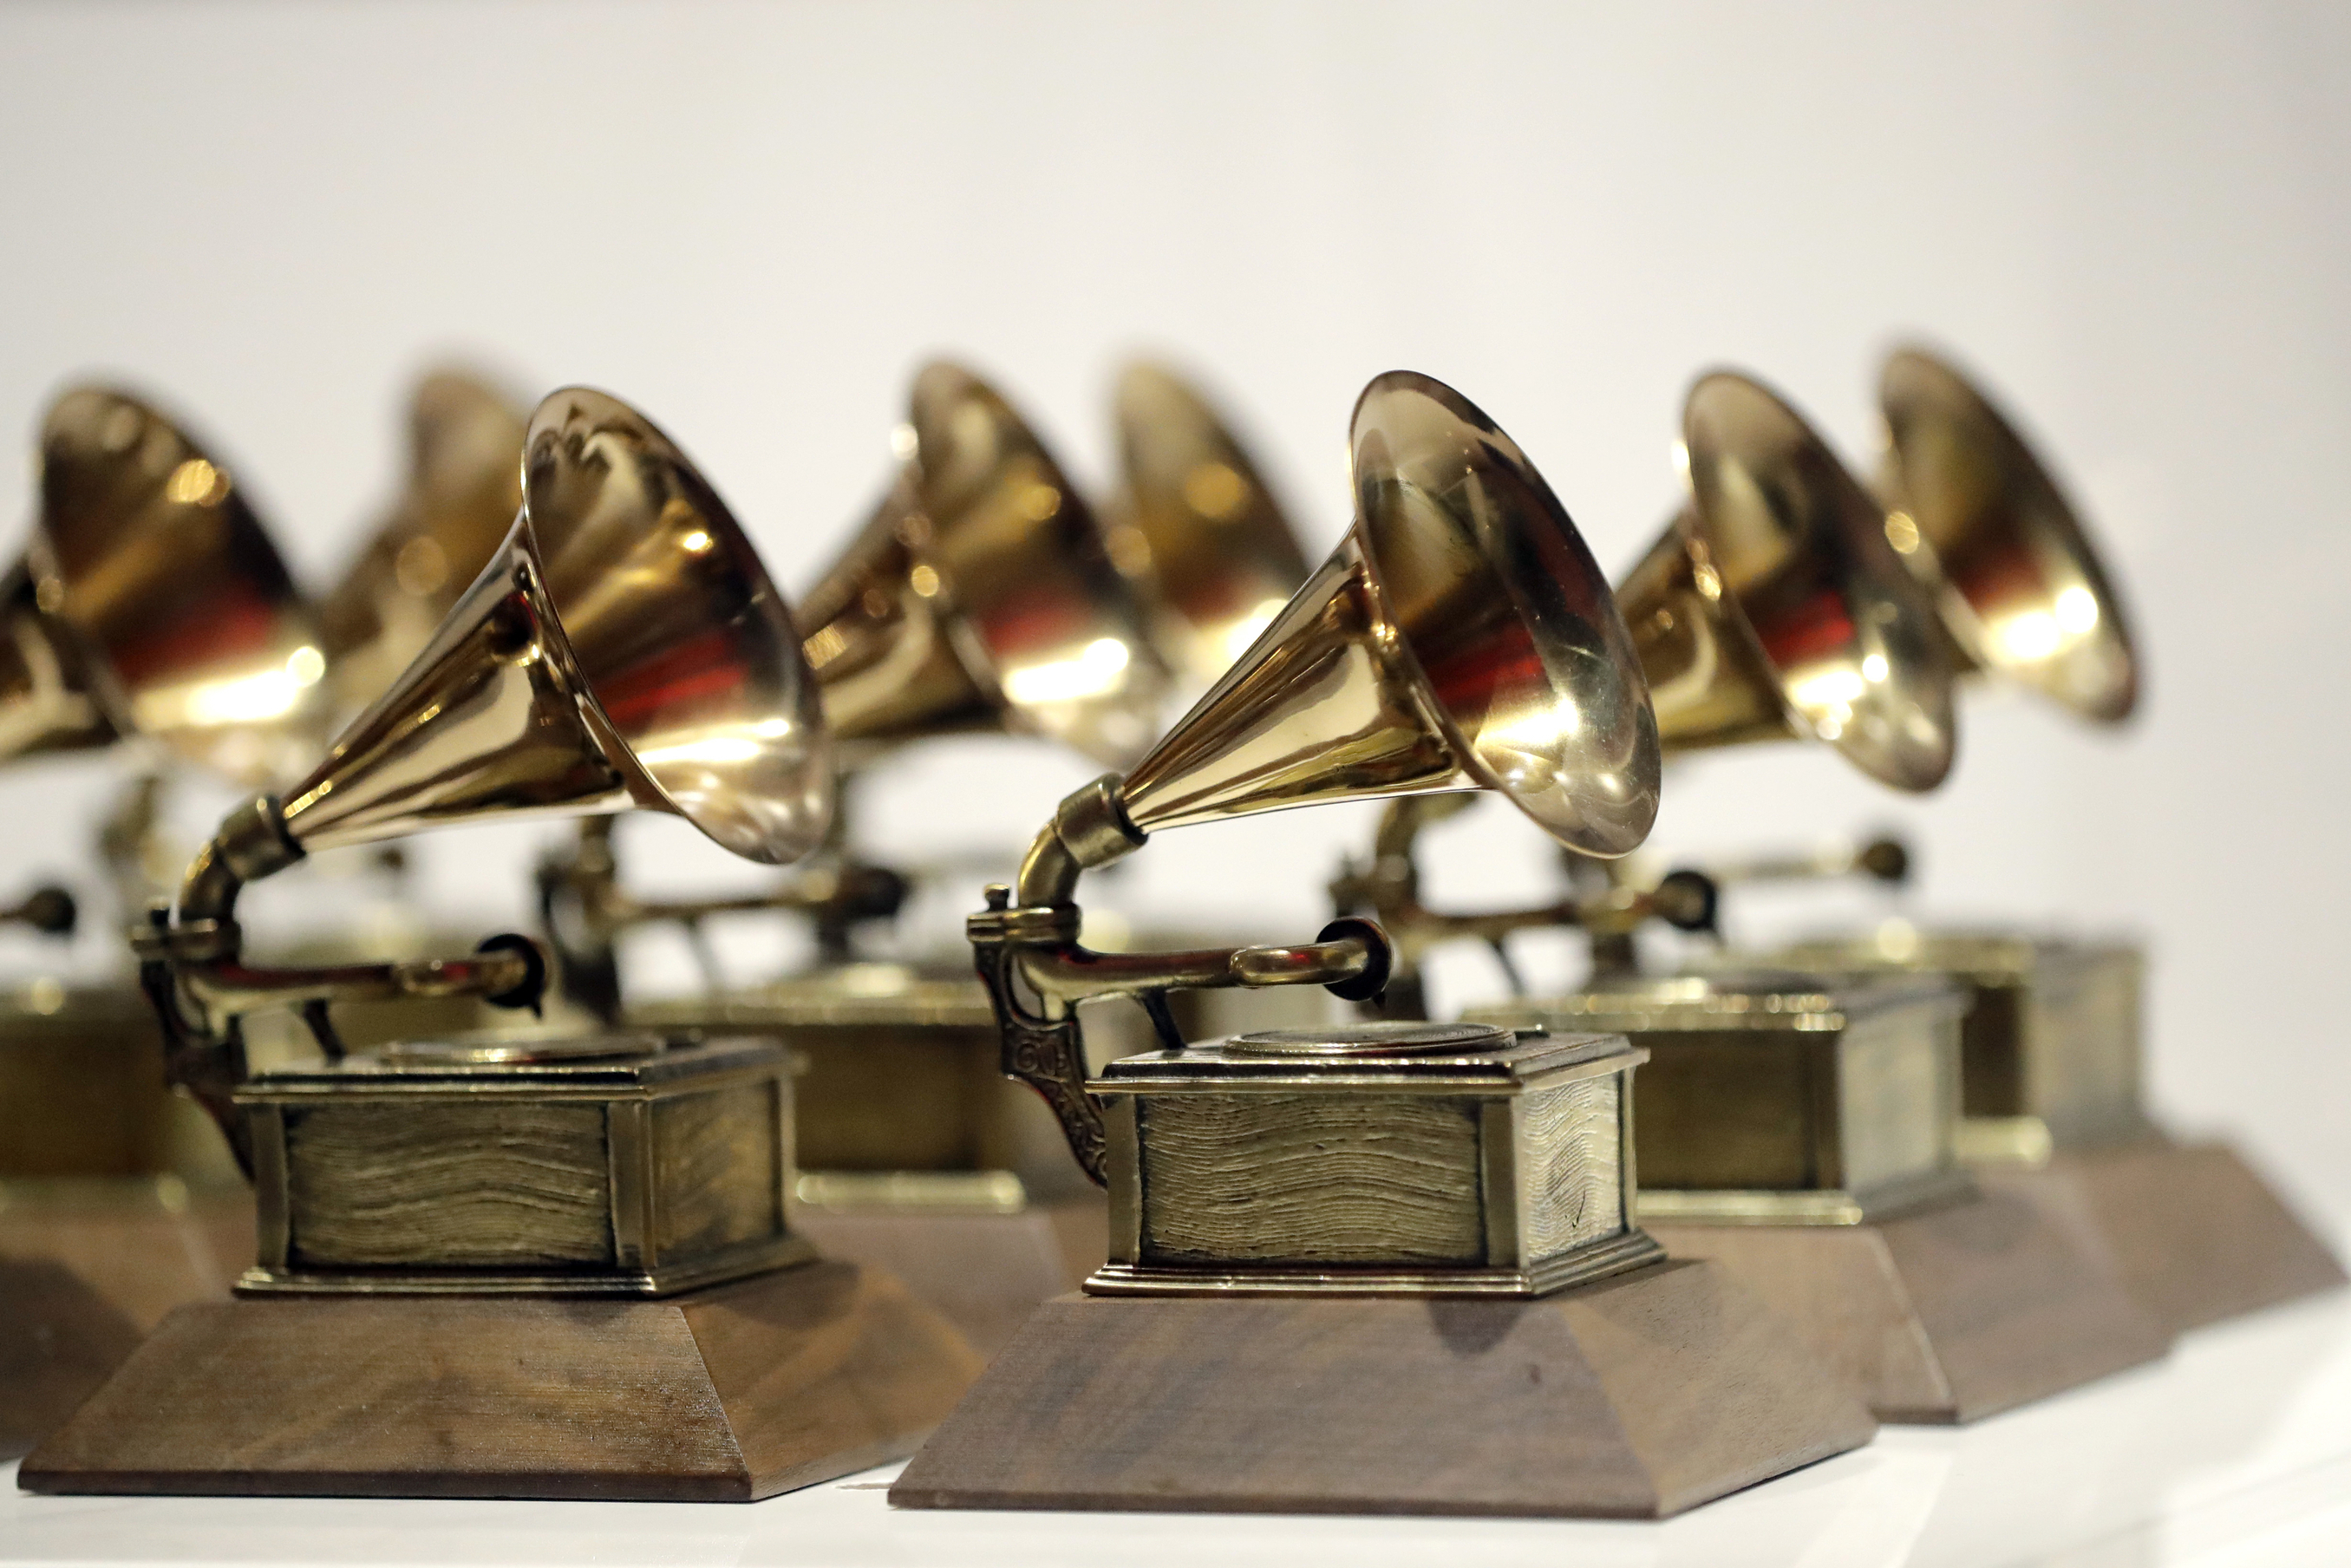 Grammy Awards are displayed at the Grammy Museum Experience at Prudential Center in Newark, New Jersey, on October 10, 2017